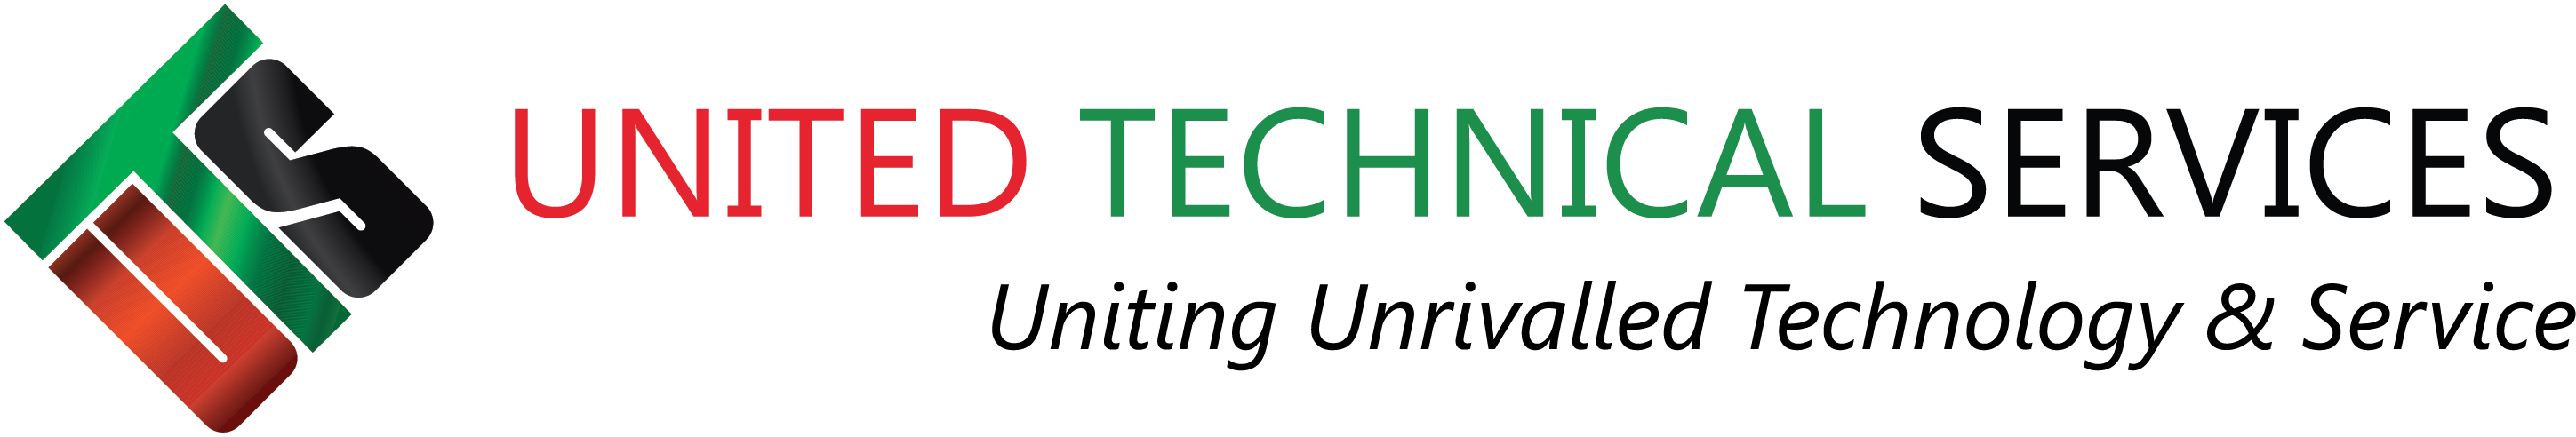 United Technical Services-logo